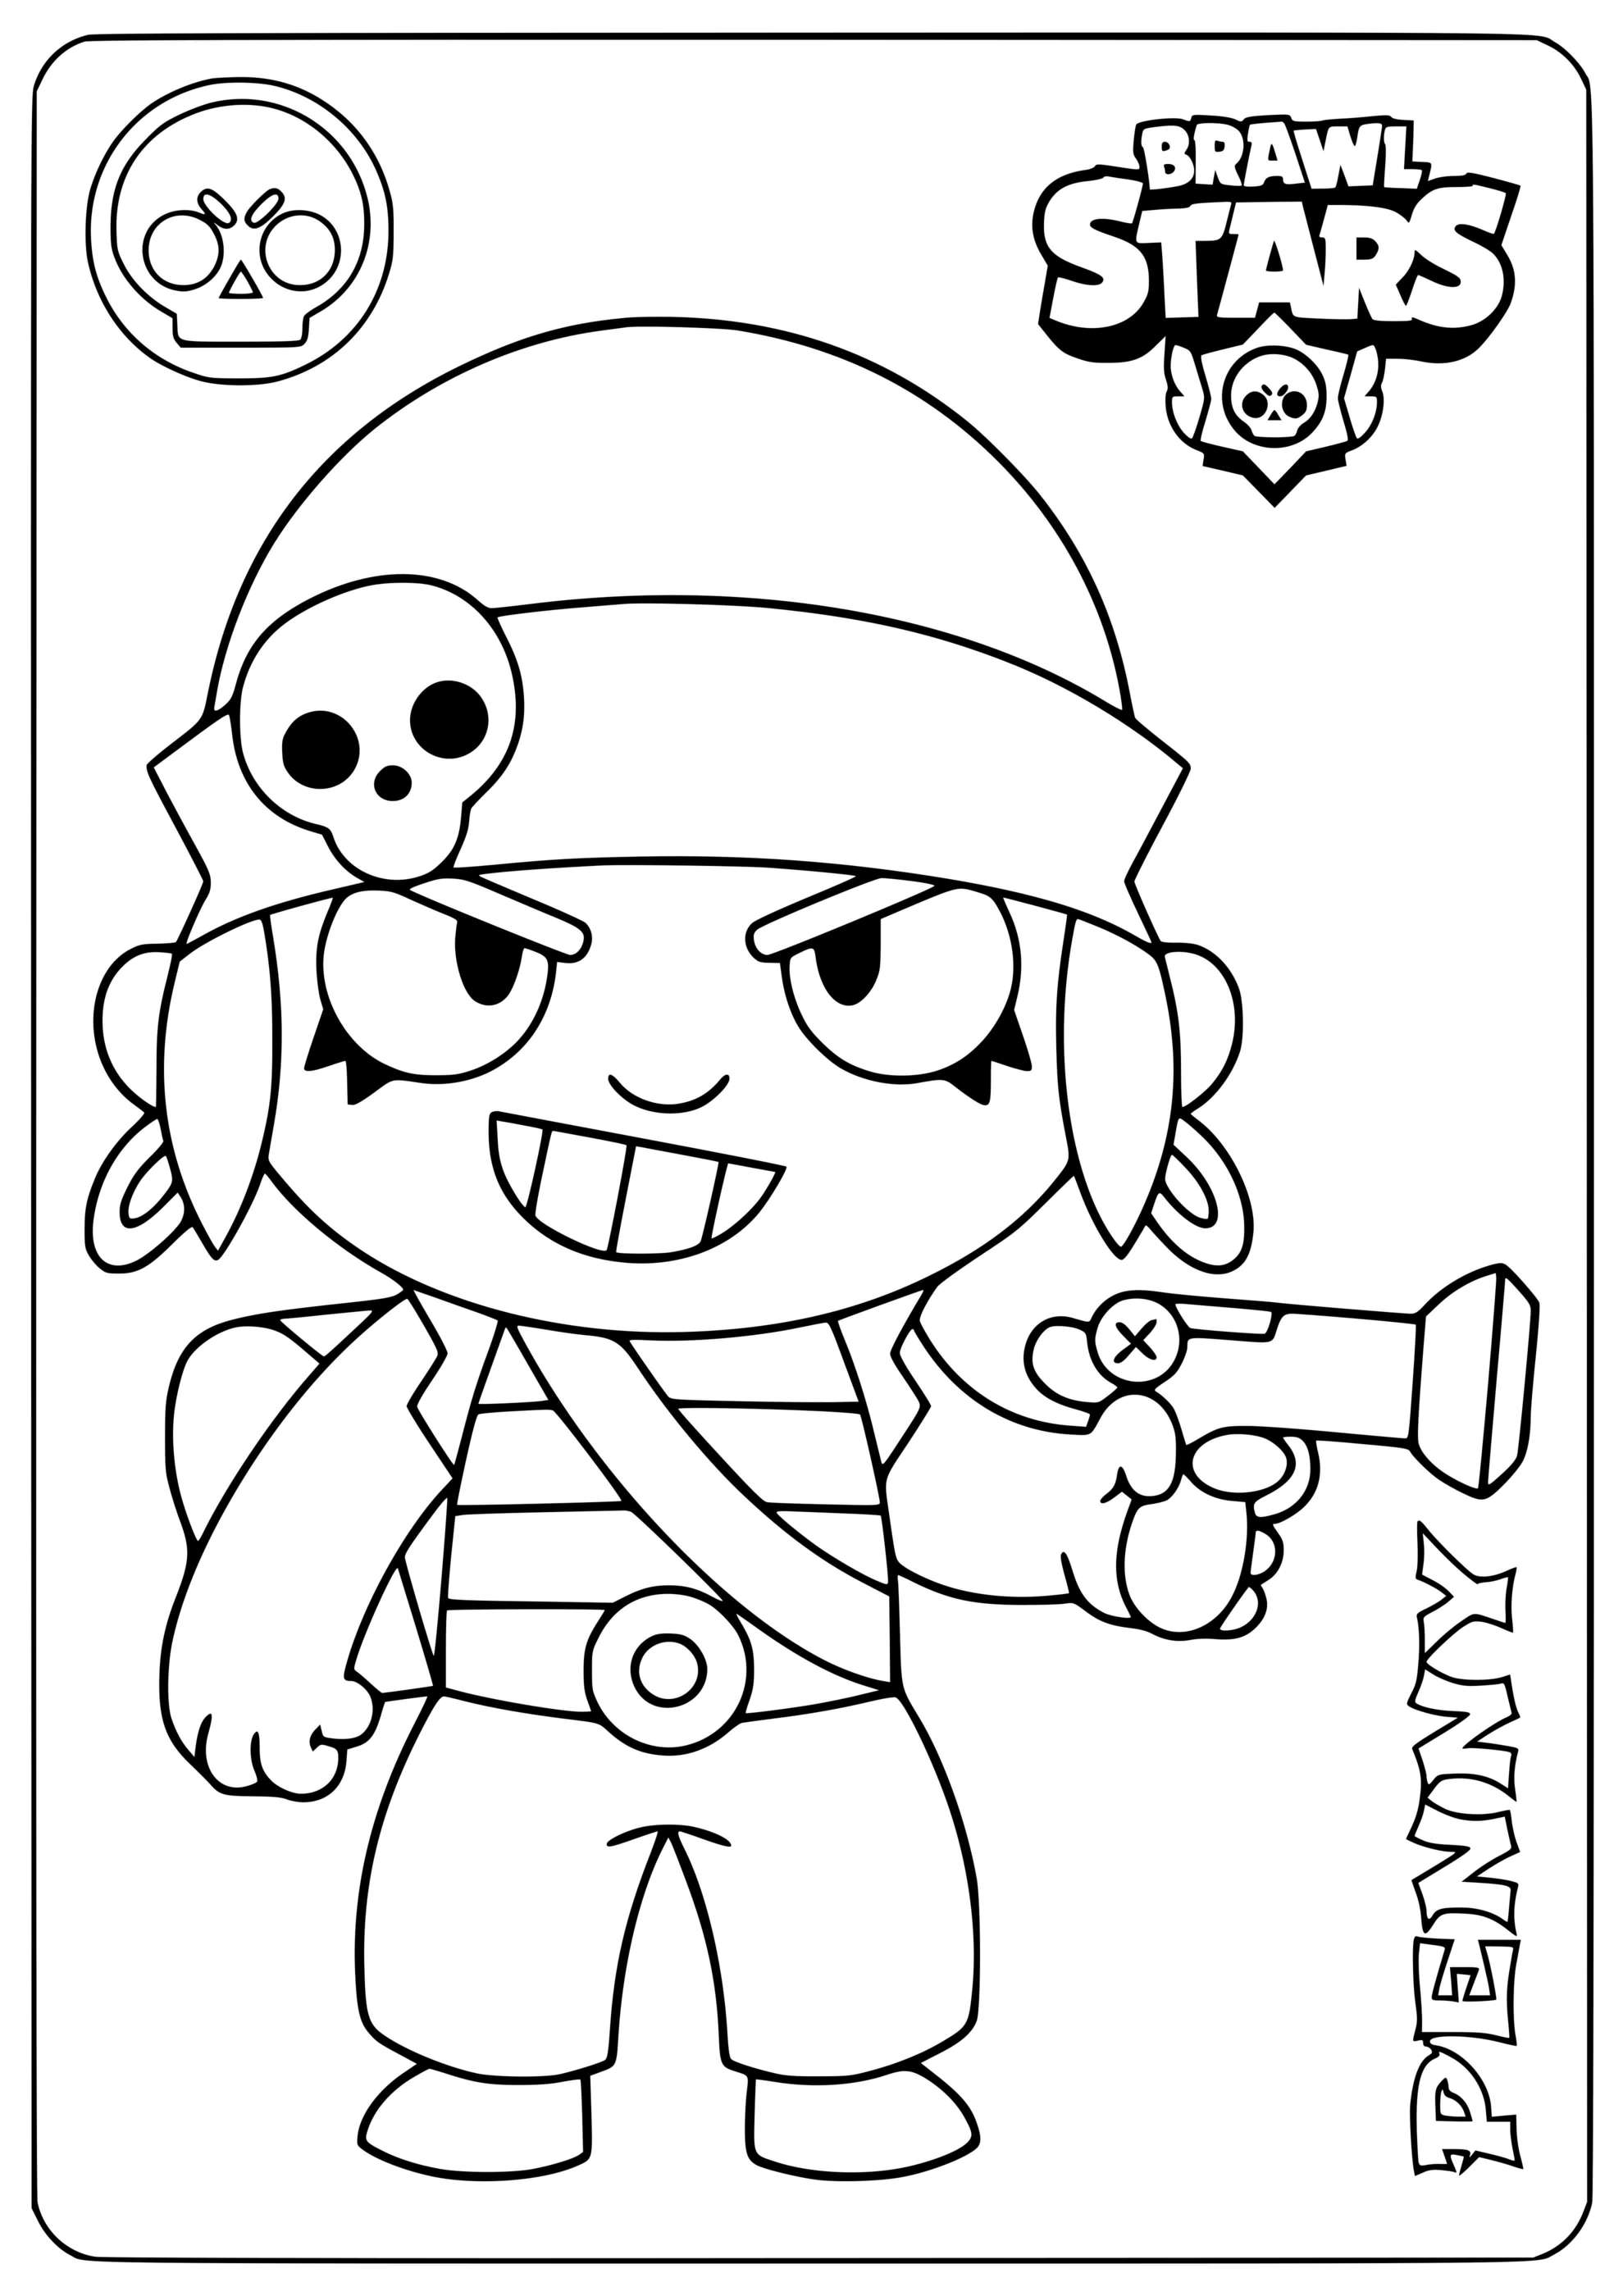 Pirate Brawl Stars Penny Coloring Page